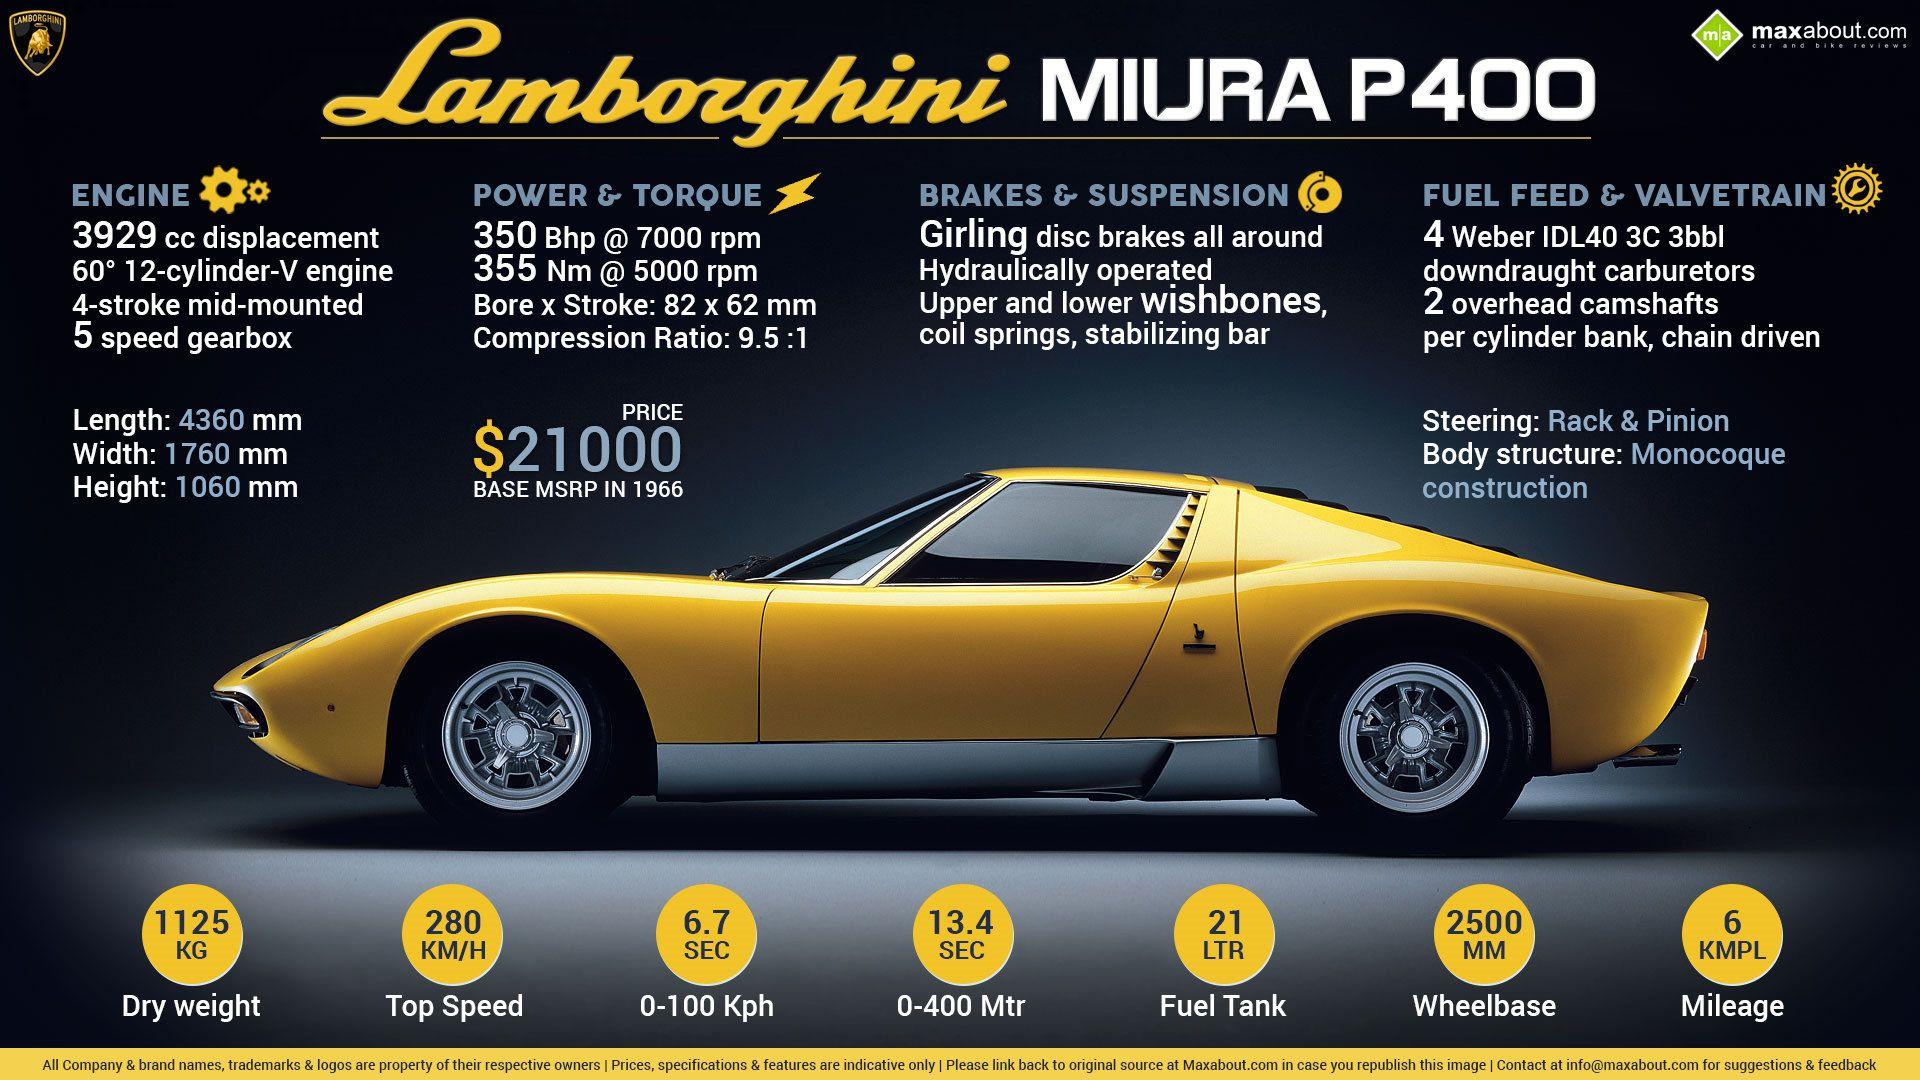 All You Need to Know about the Legendary Lamborghini Miura P